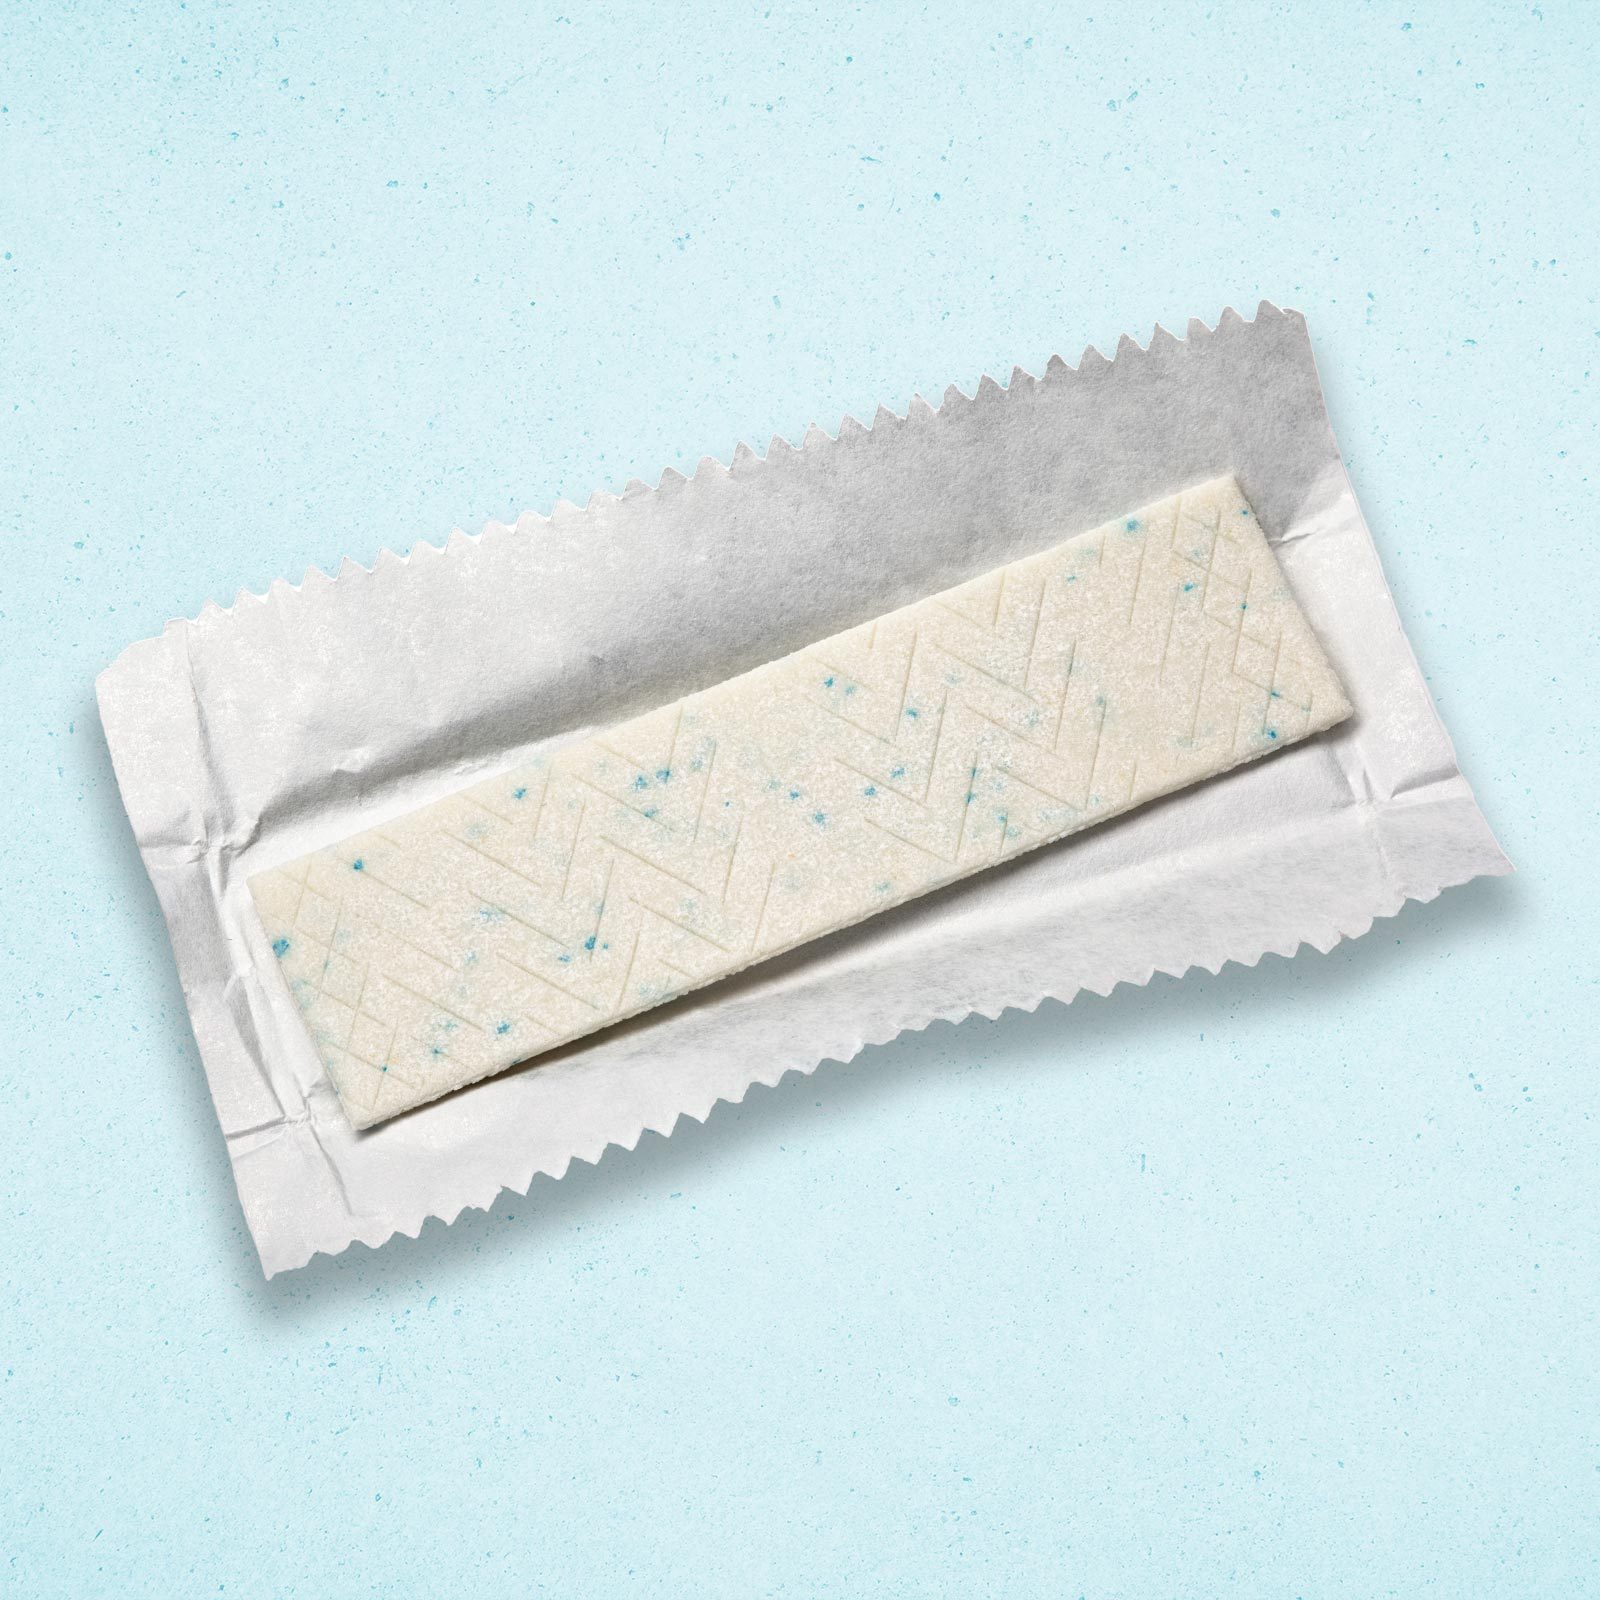 Chewing Gum Reduces Stress - The American Institute of Stress